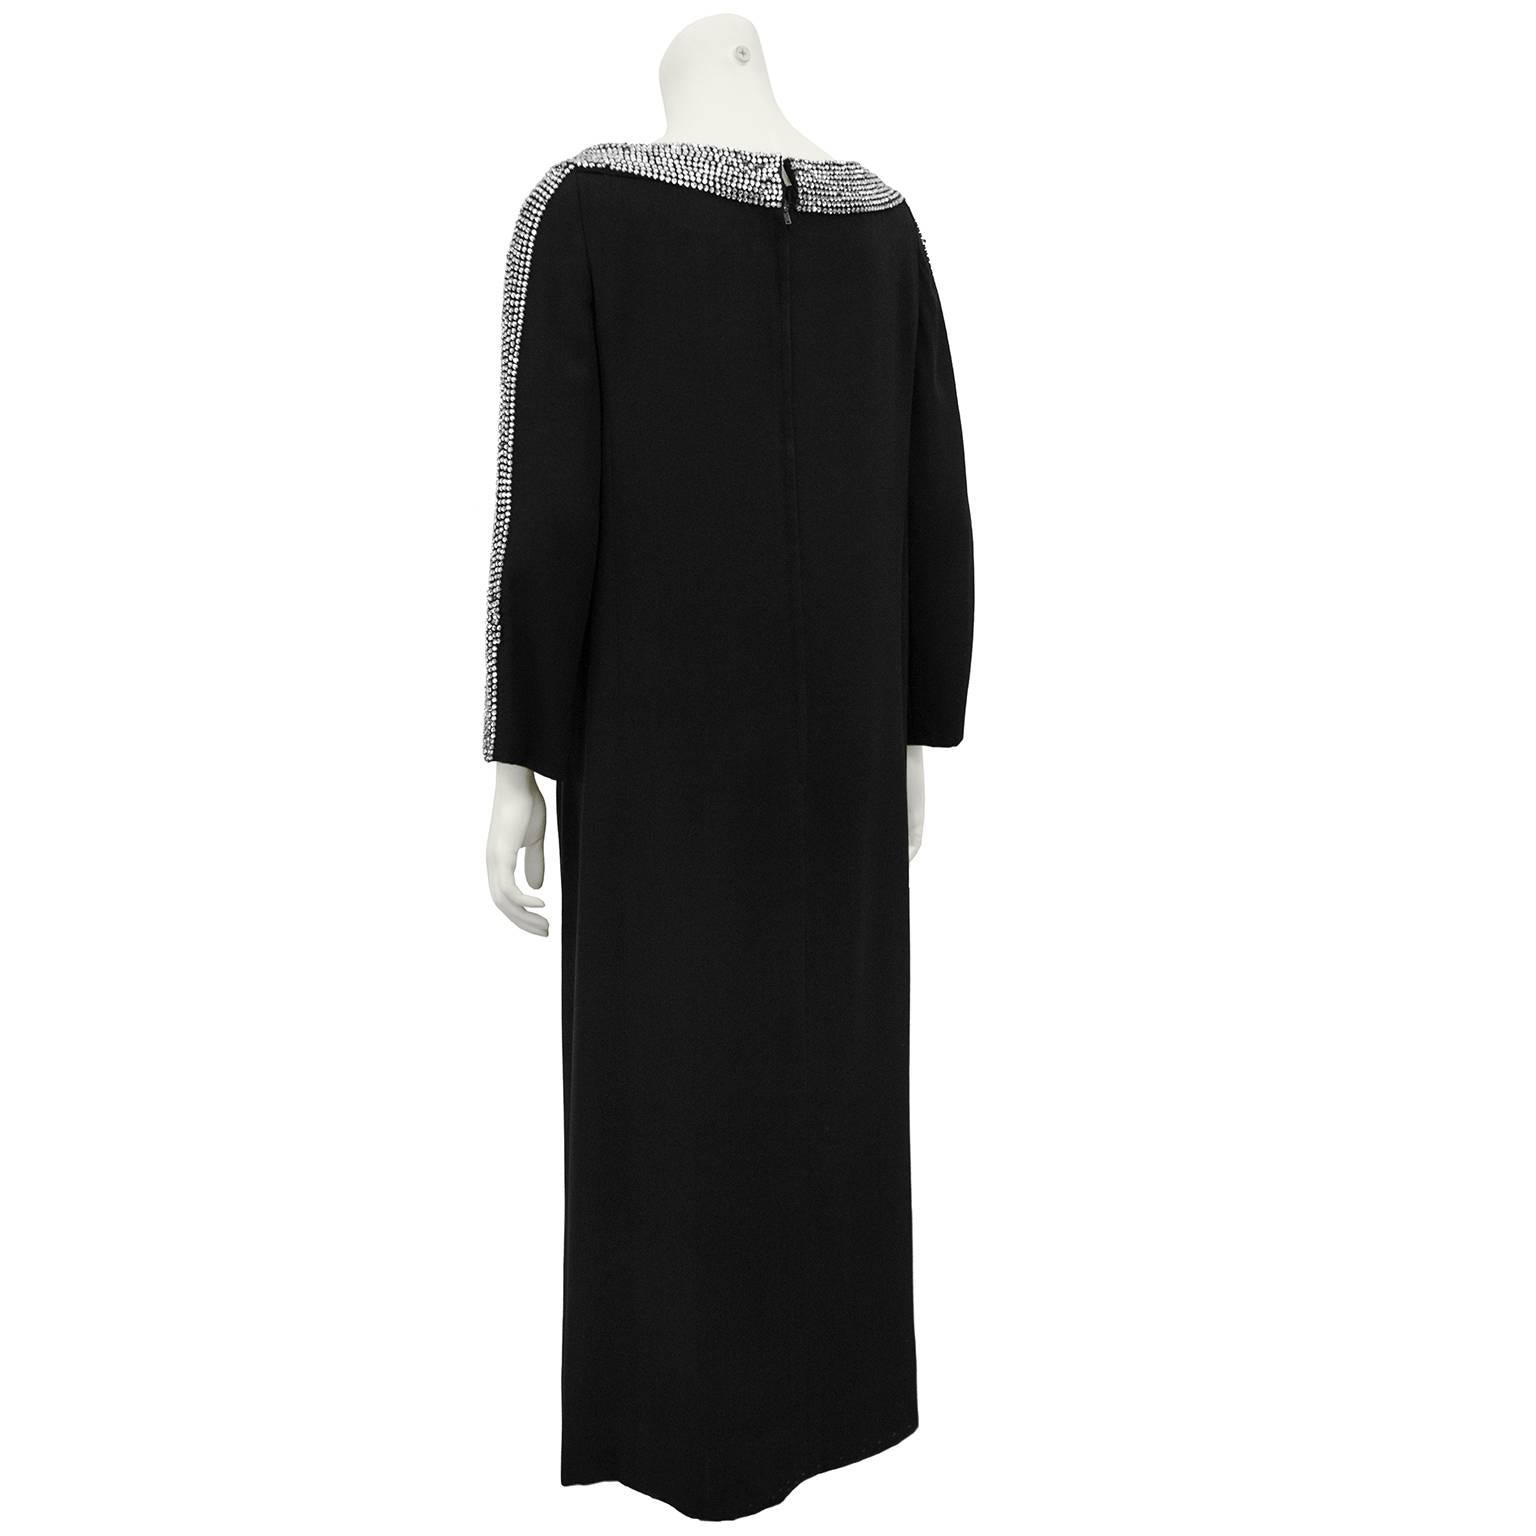 1970s Ruth McCulloch Black Dress with Rhinestone Trim  In Excellent Condition For Sale In Toronto, Ontario